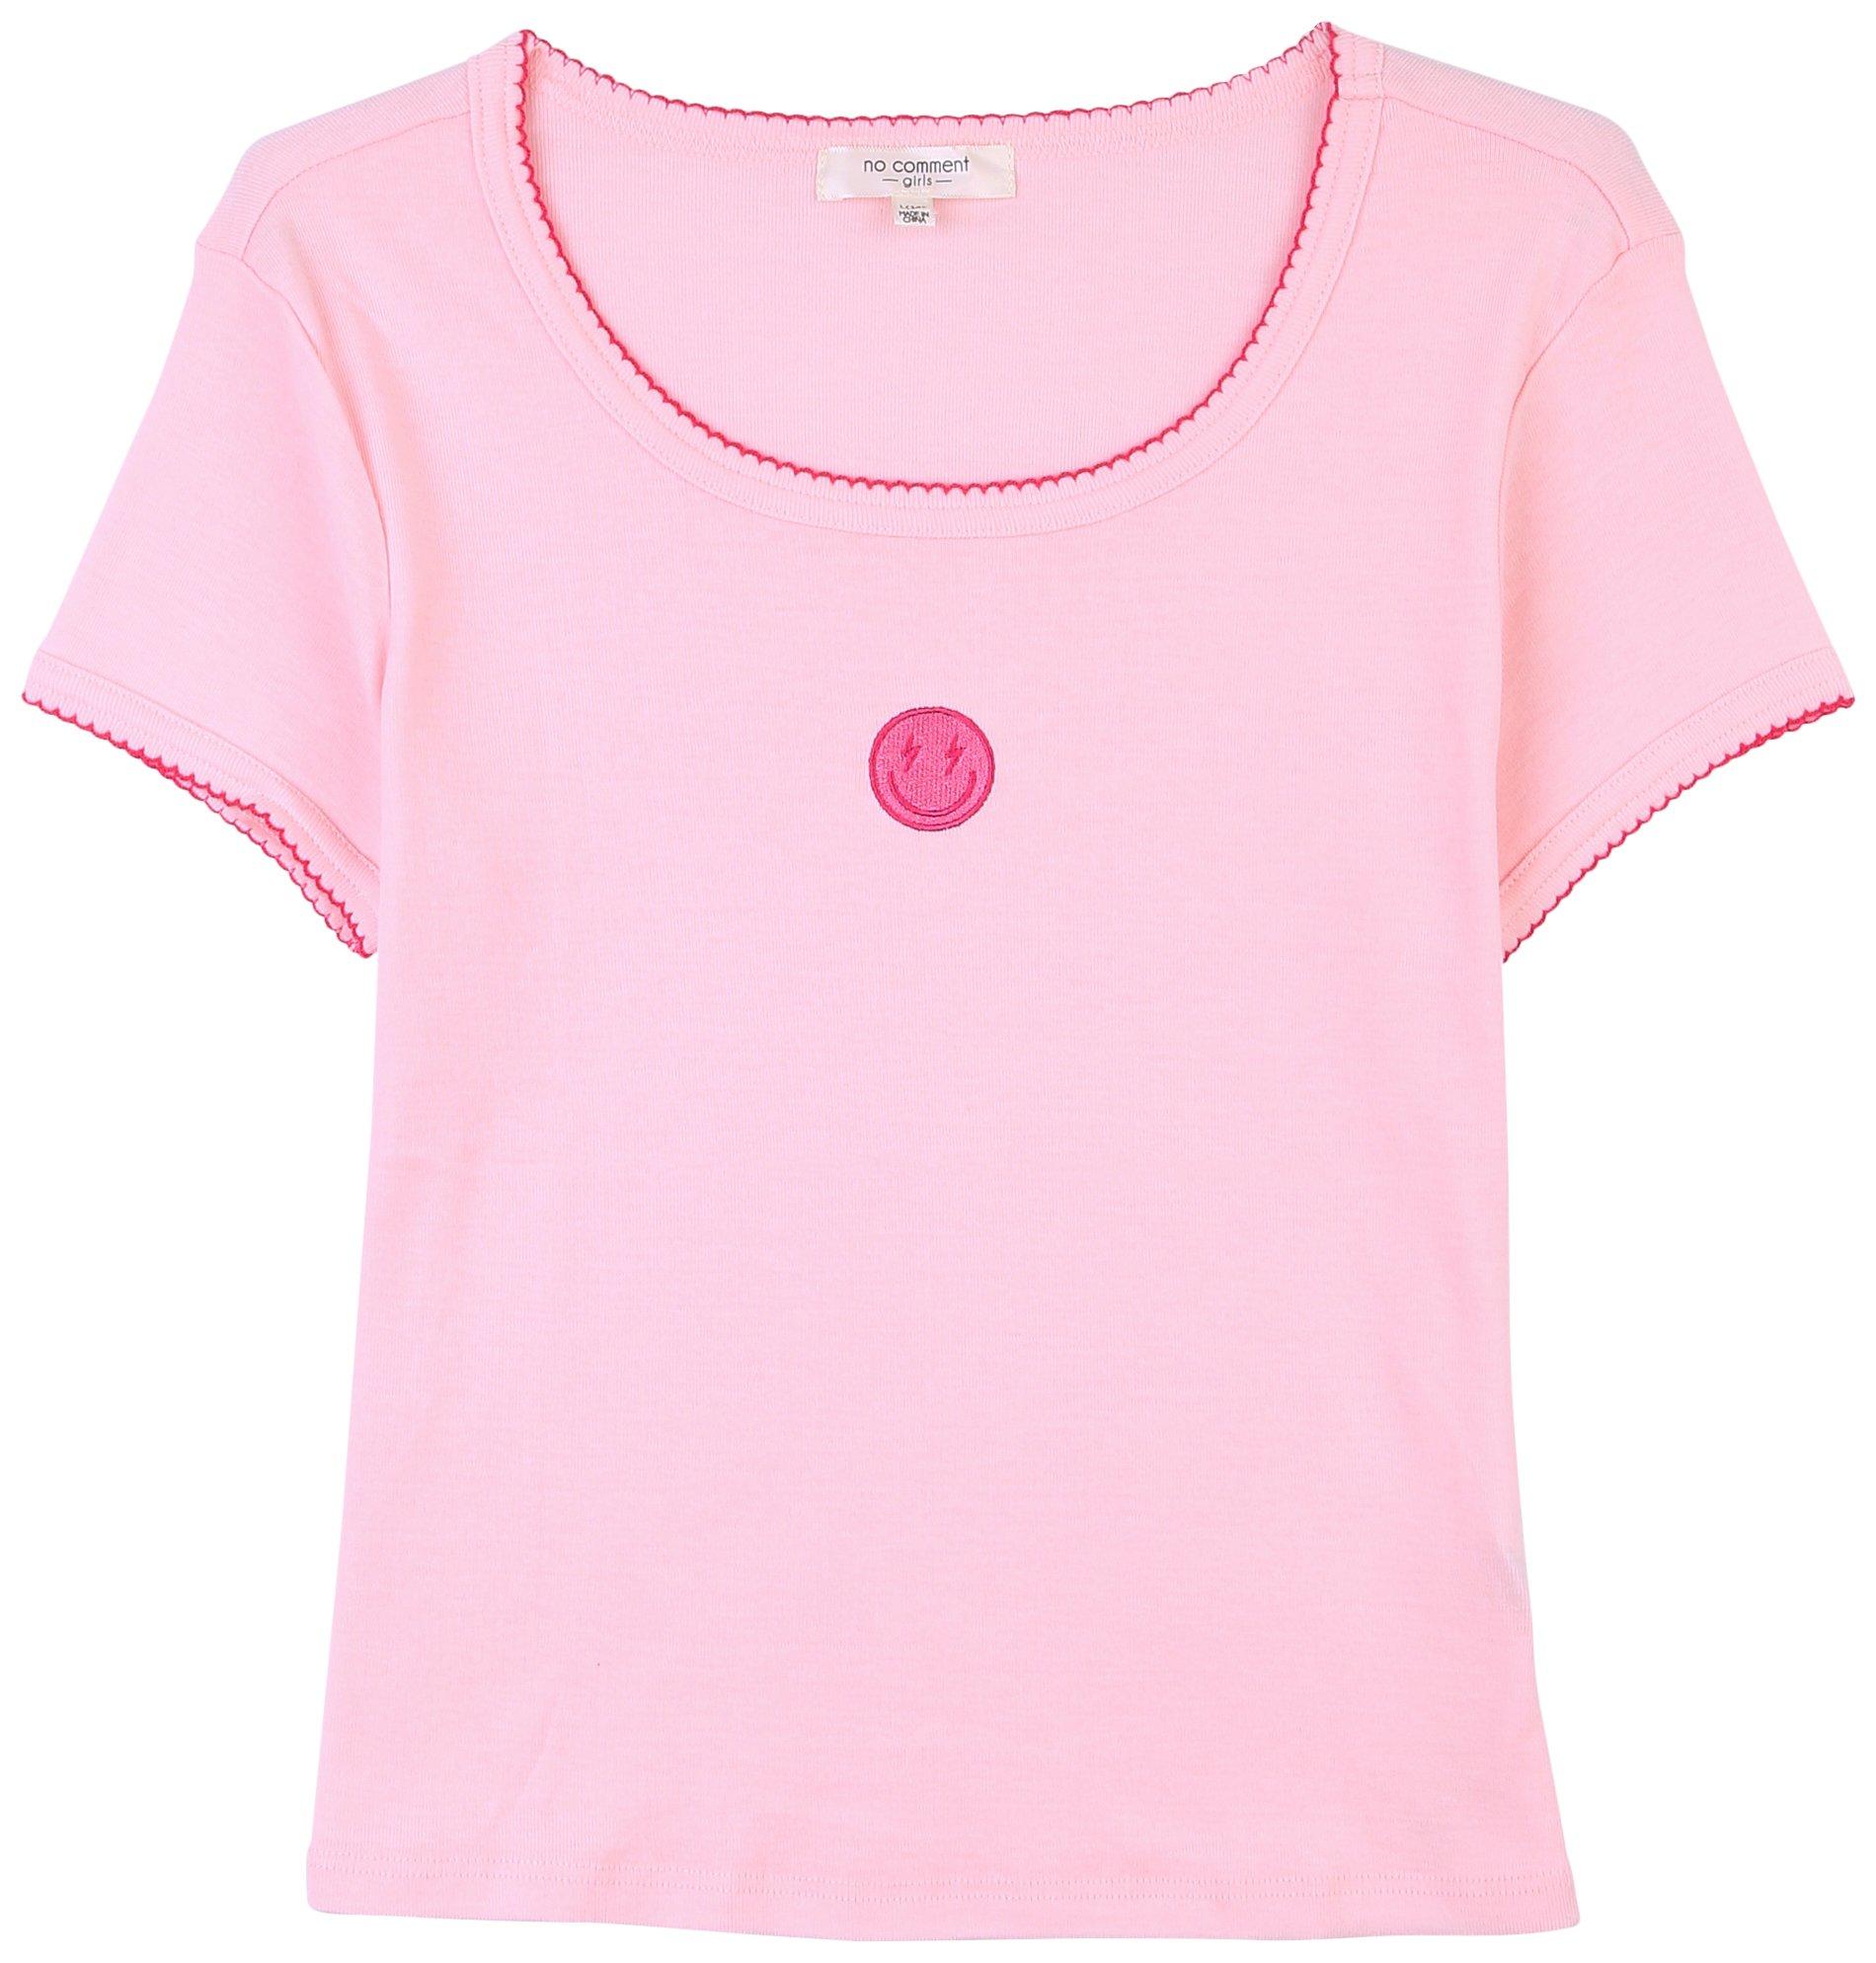 Big Girls Embroidered Smiley Face Top